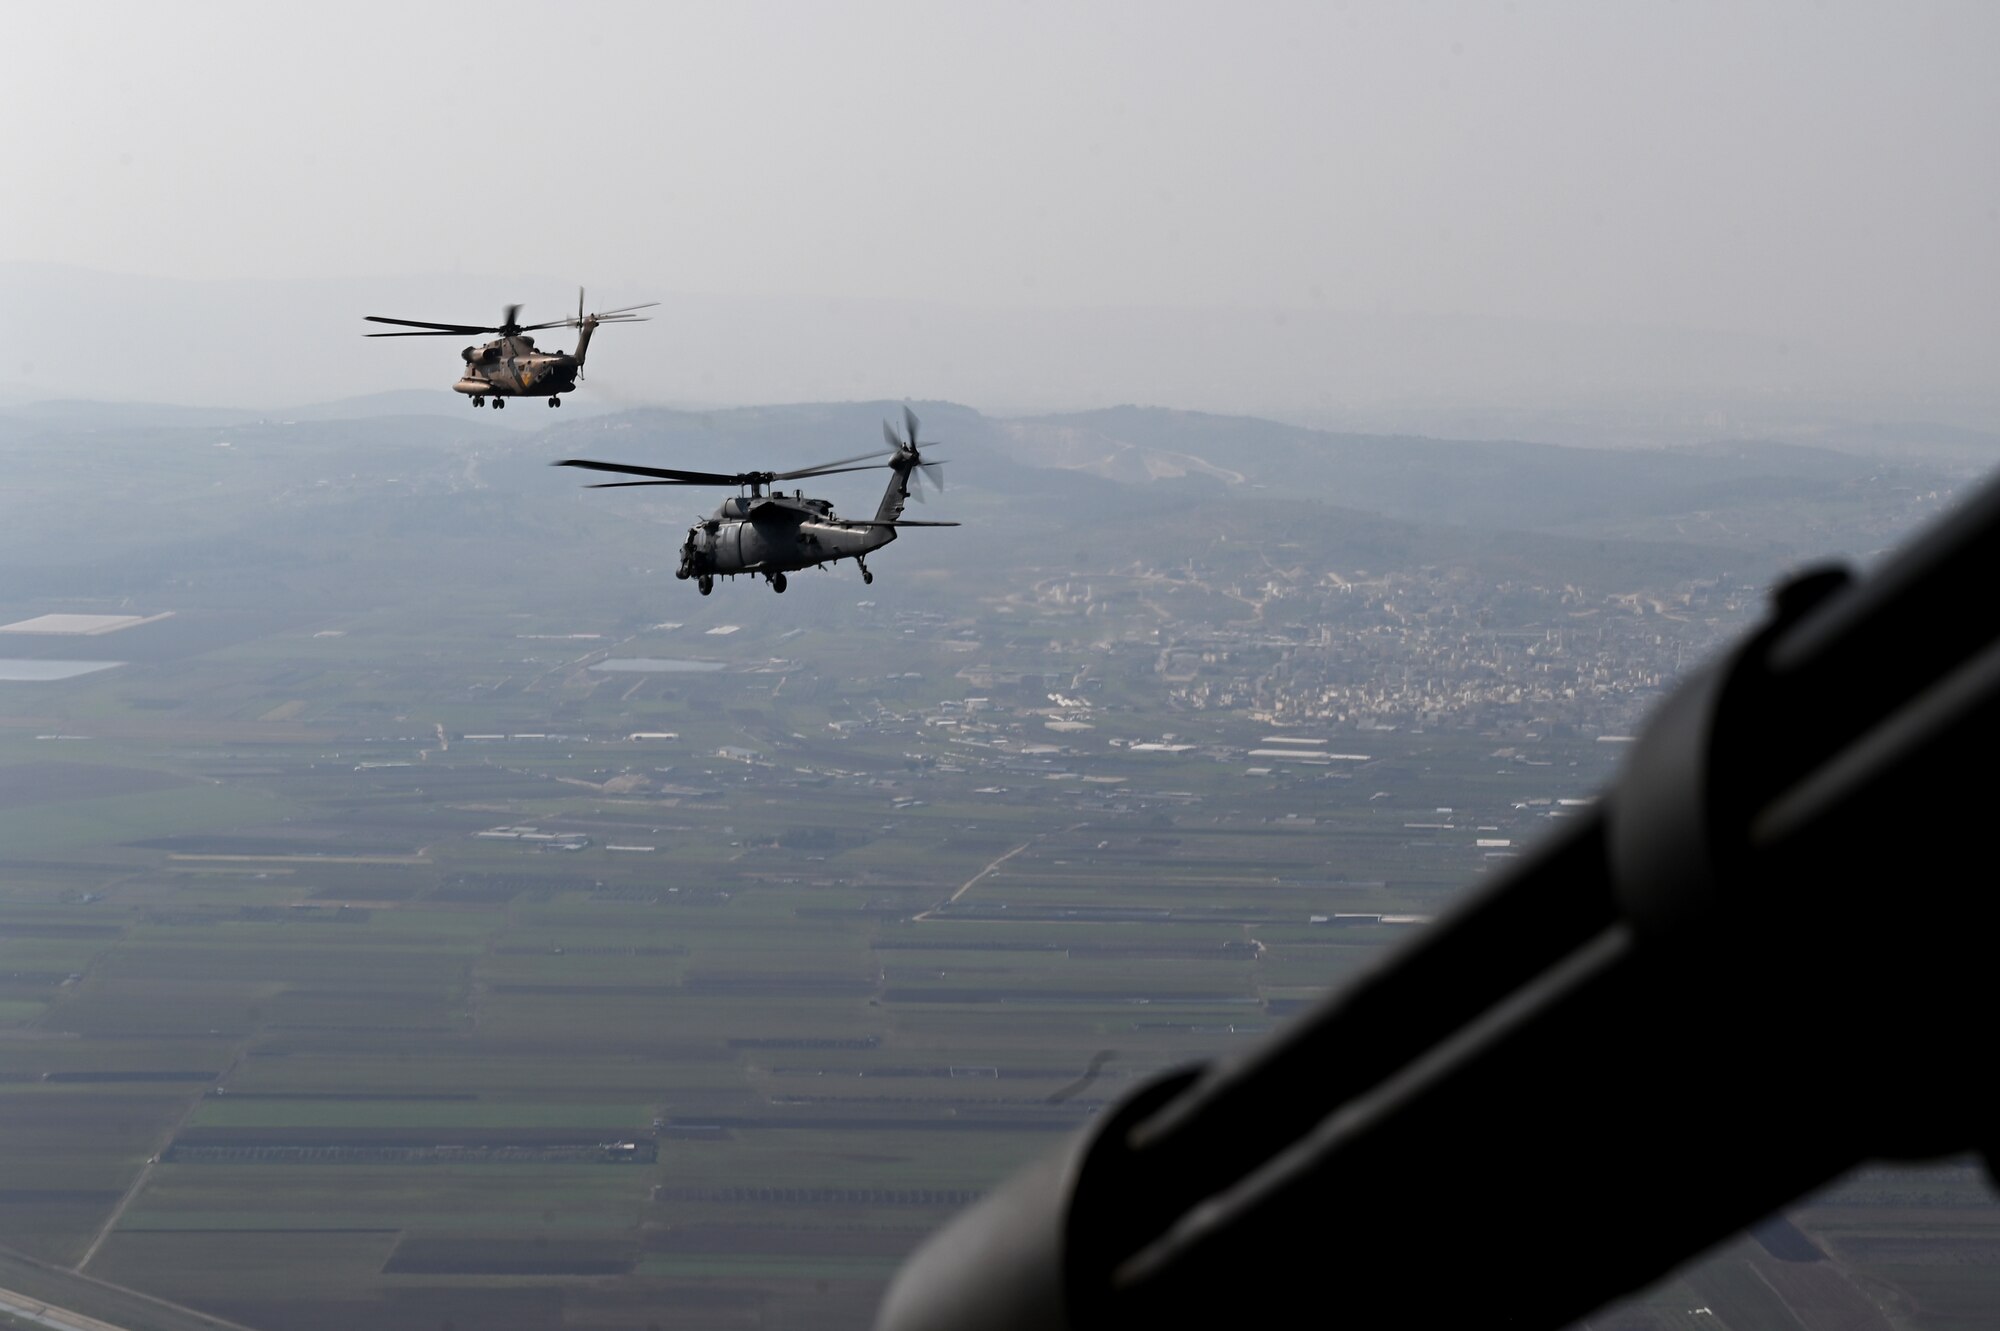 An Israeli Air Force UH-60 Black Hawk helicopter and two U.S. Air Force HH-60 Pave Hawks assigned to the 46th Expeditionary Rescue Squadron conduct a combat search and rescue exercise in Northern Israel, Jan. 24, 2023. Juniper Oak is a large-scale bilateral multi-domain exercise aimed to enhance interoperability between U.S. and Israeli armed forces contributing to integrated regional security. (U.S. Air Force photo by Staff Sgt. Gerald Willis)